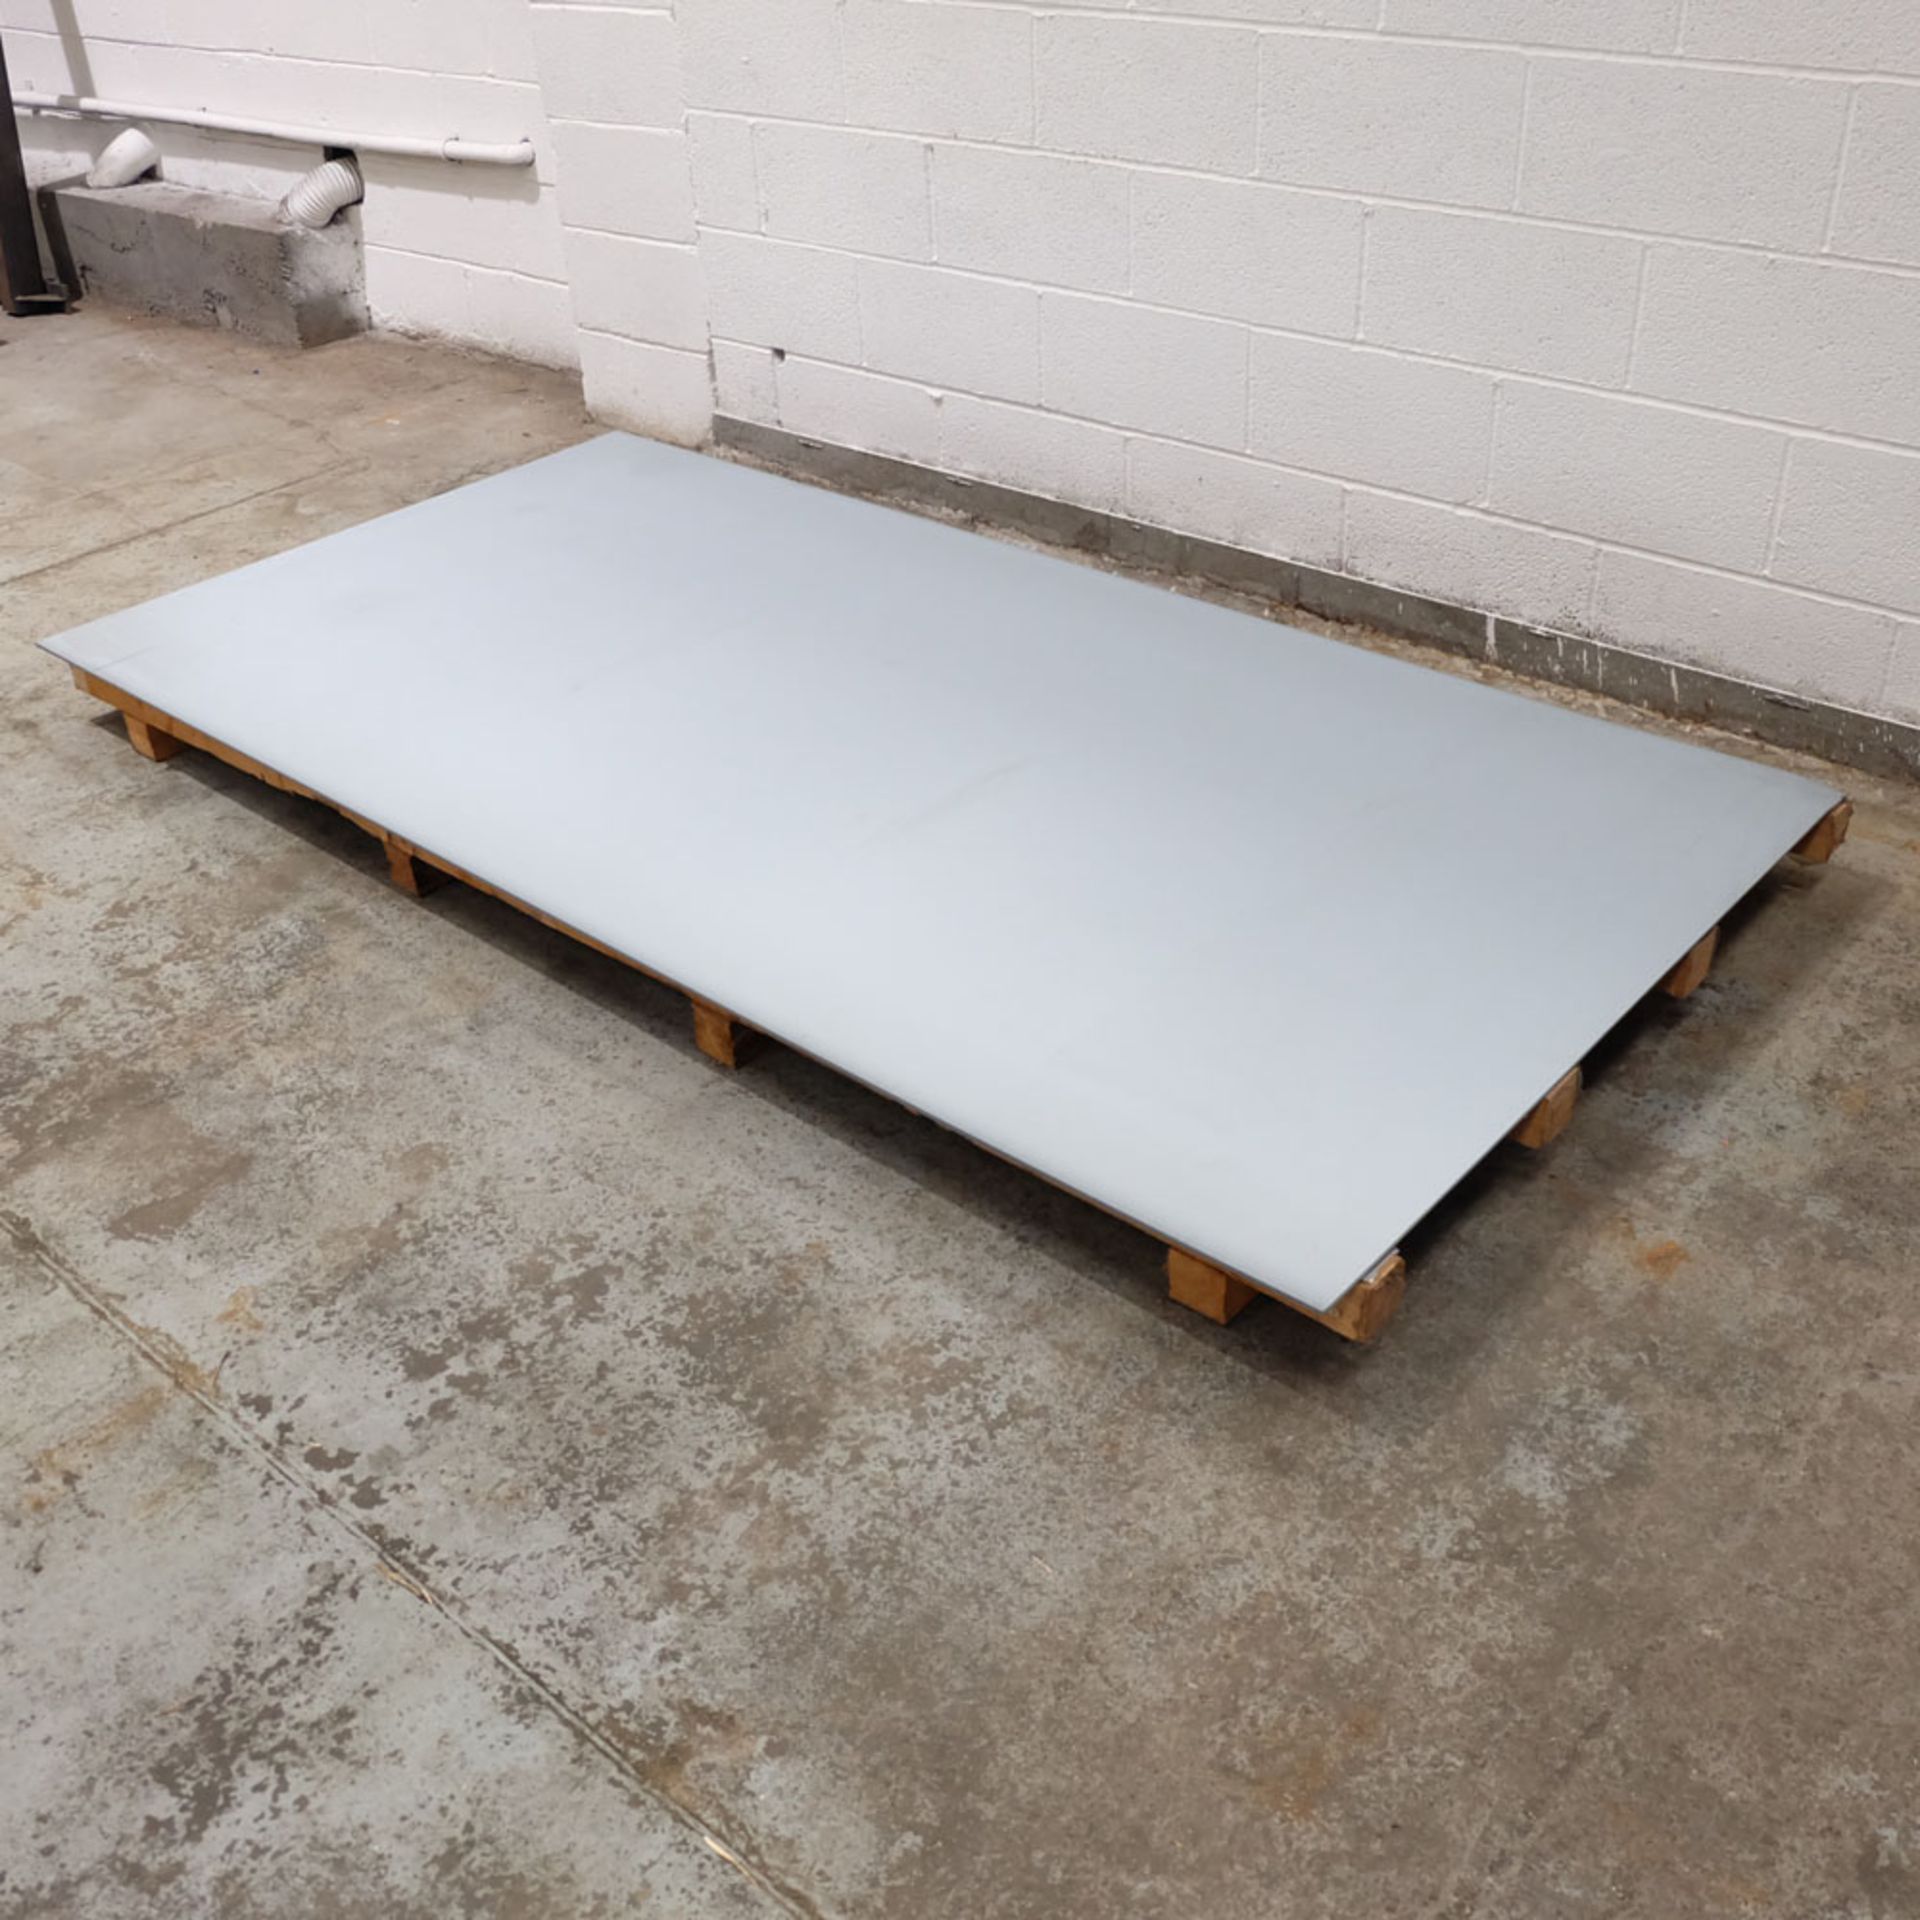 5 x Steel Sheets. Approx 2500mm x 1250mm x 1.2mm Thickness. Damage to Corners. - Image 3 of 6